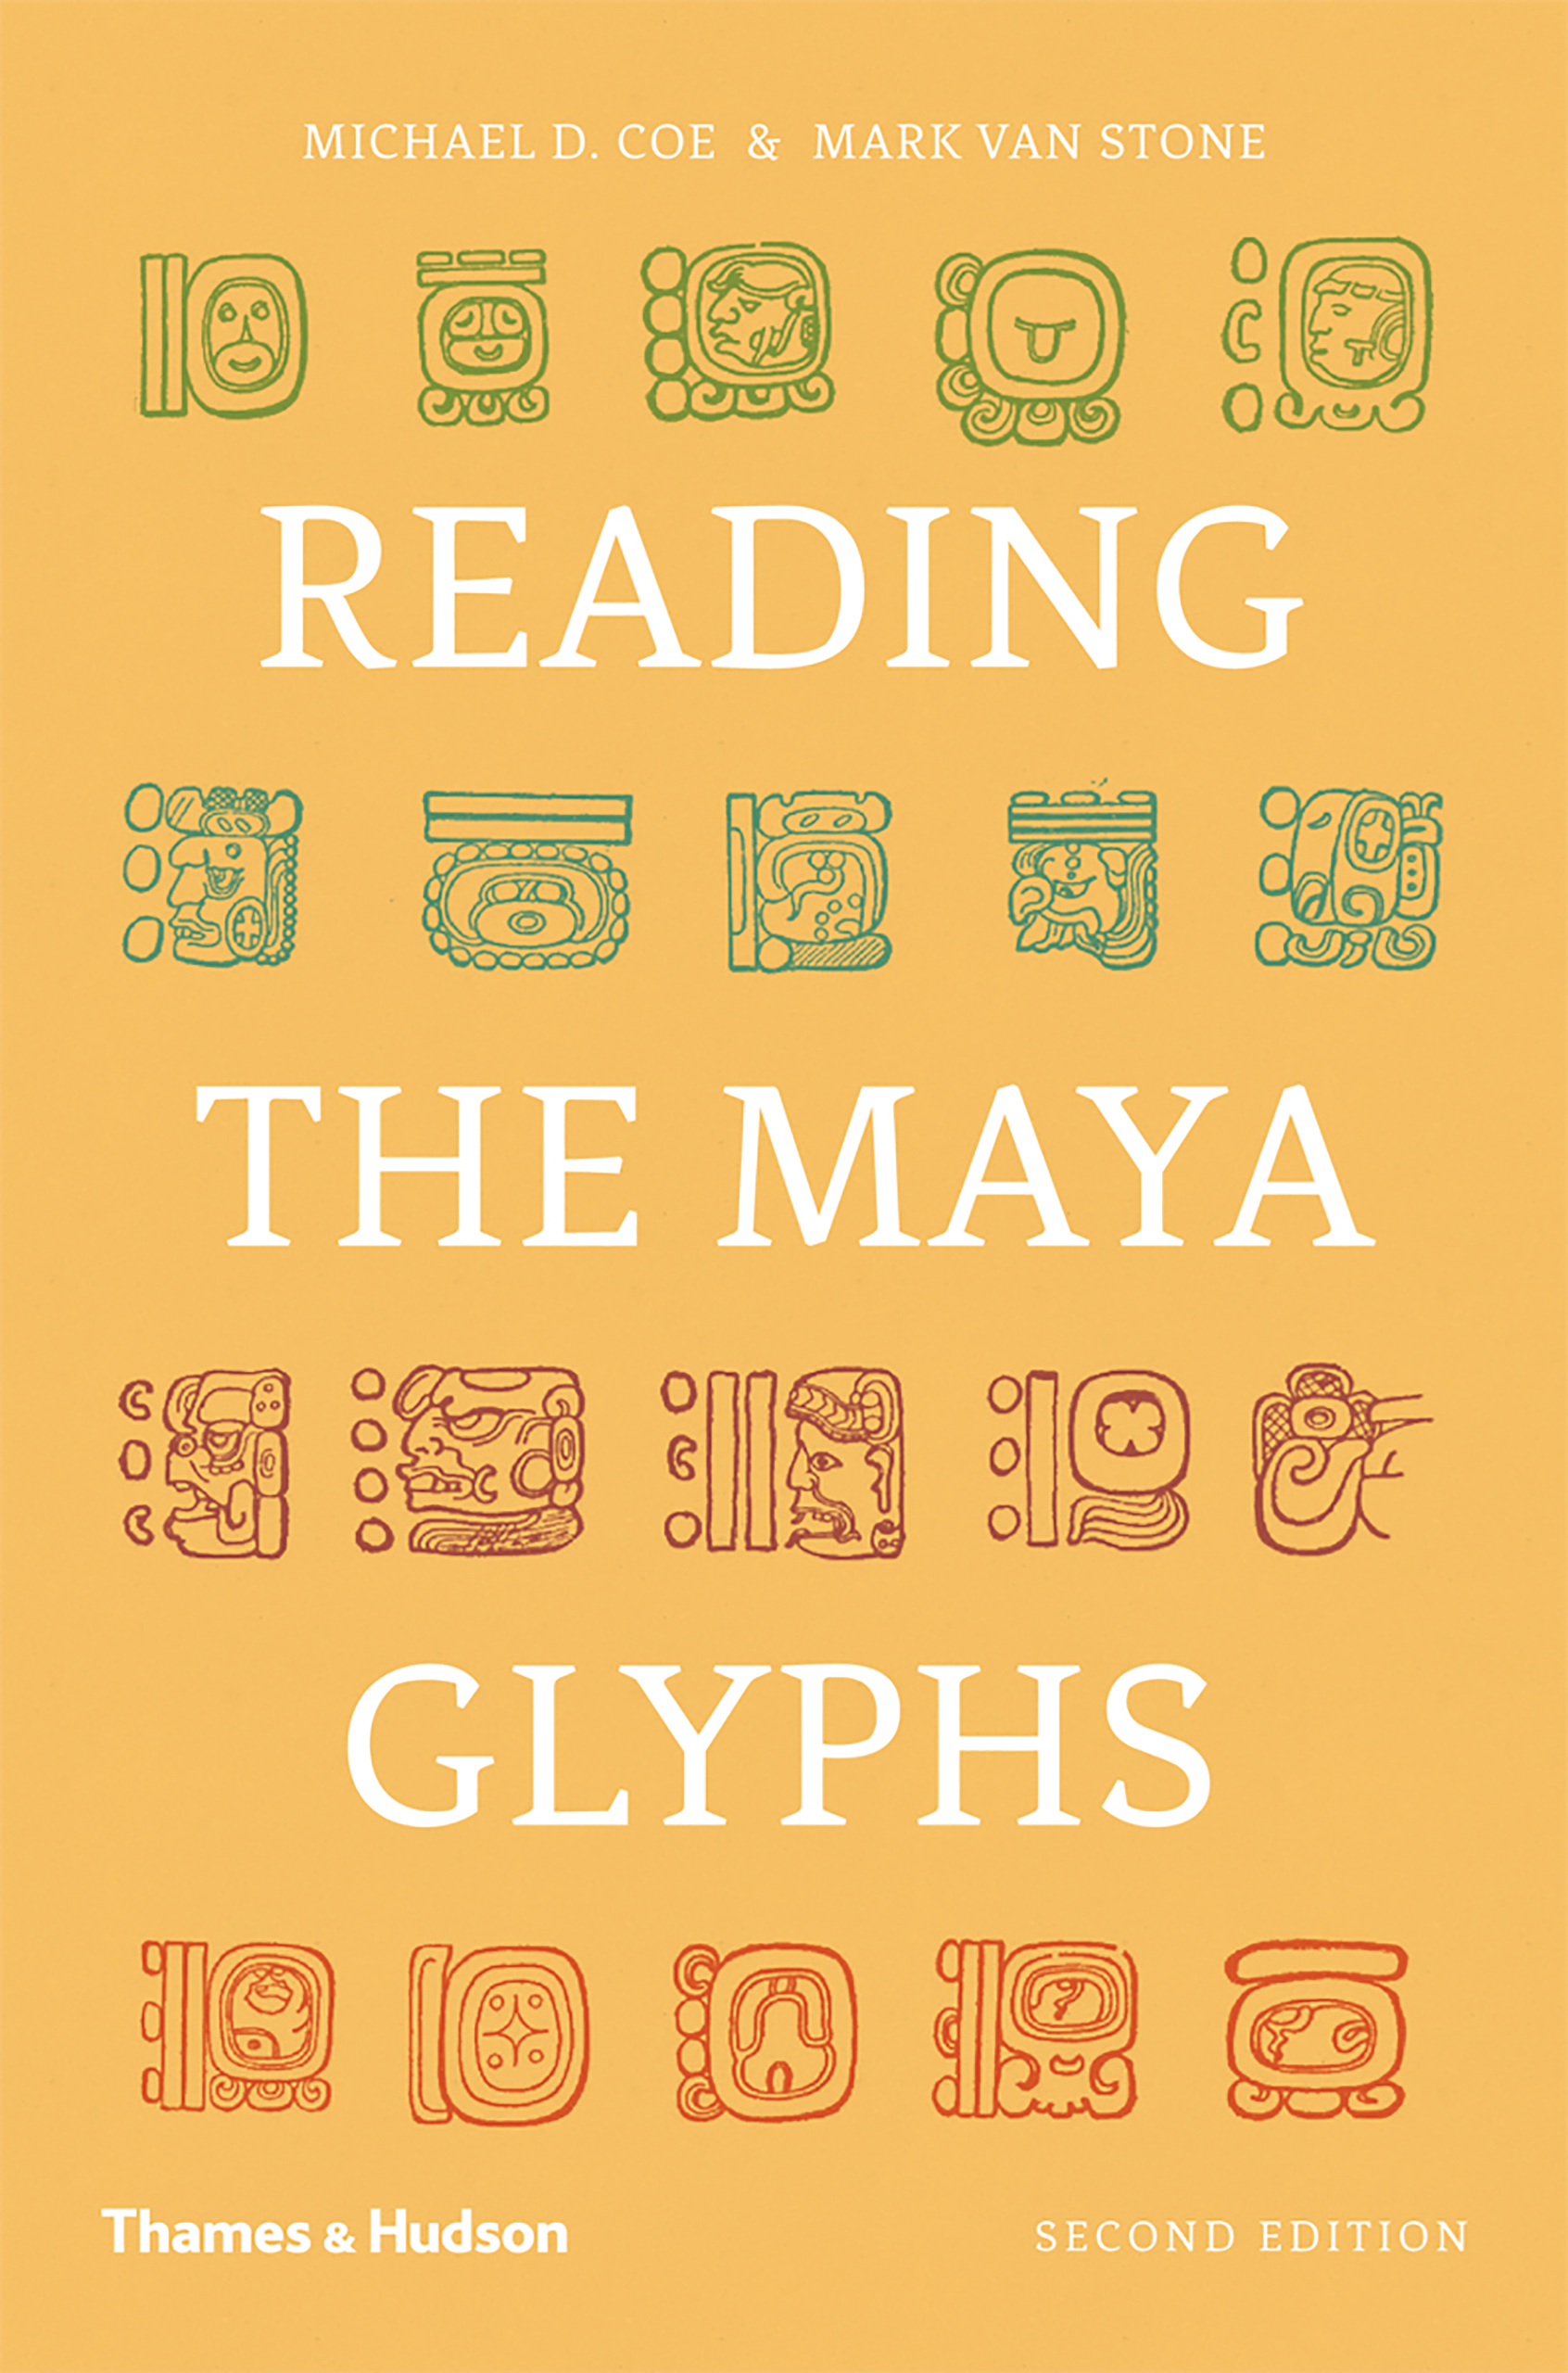 Reading the Maya Glyphs (Second Edition) - 15-24.99